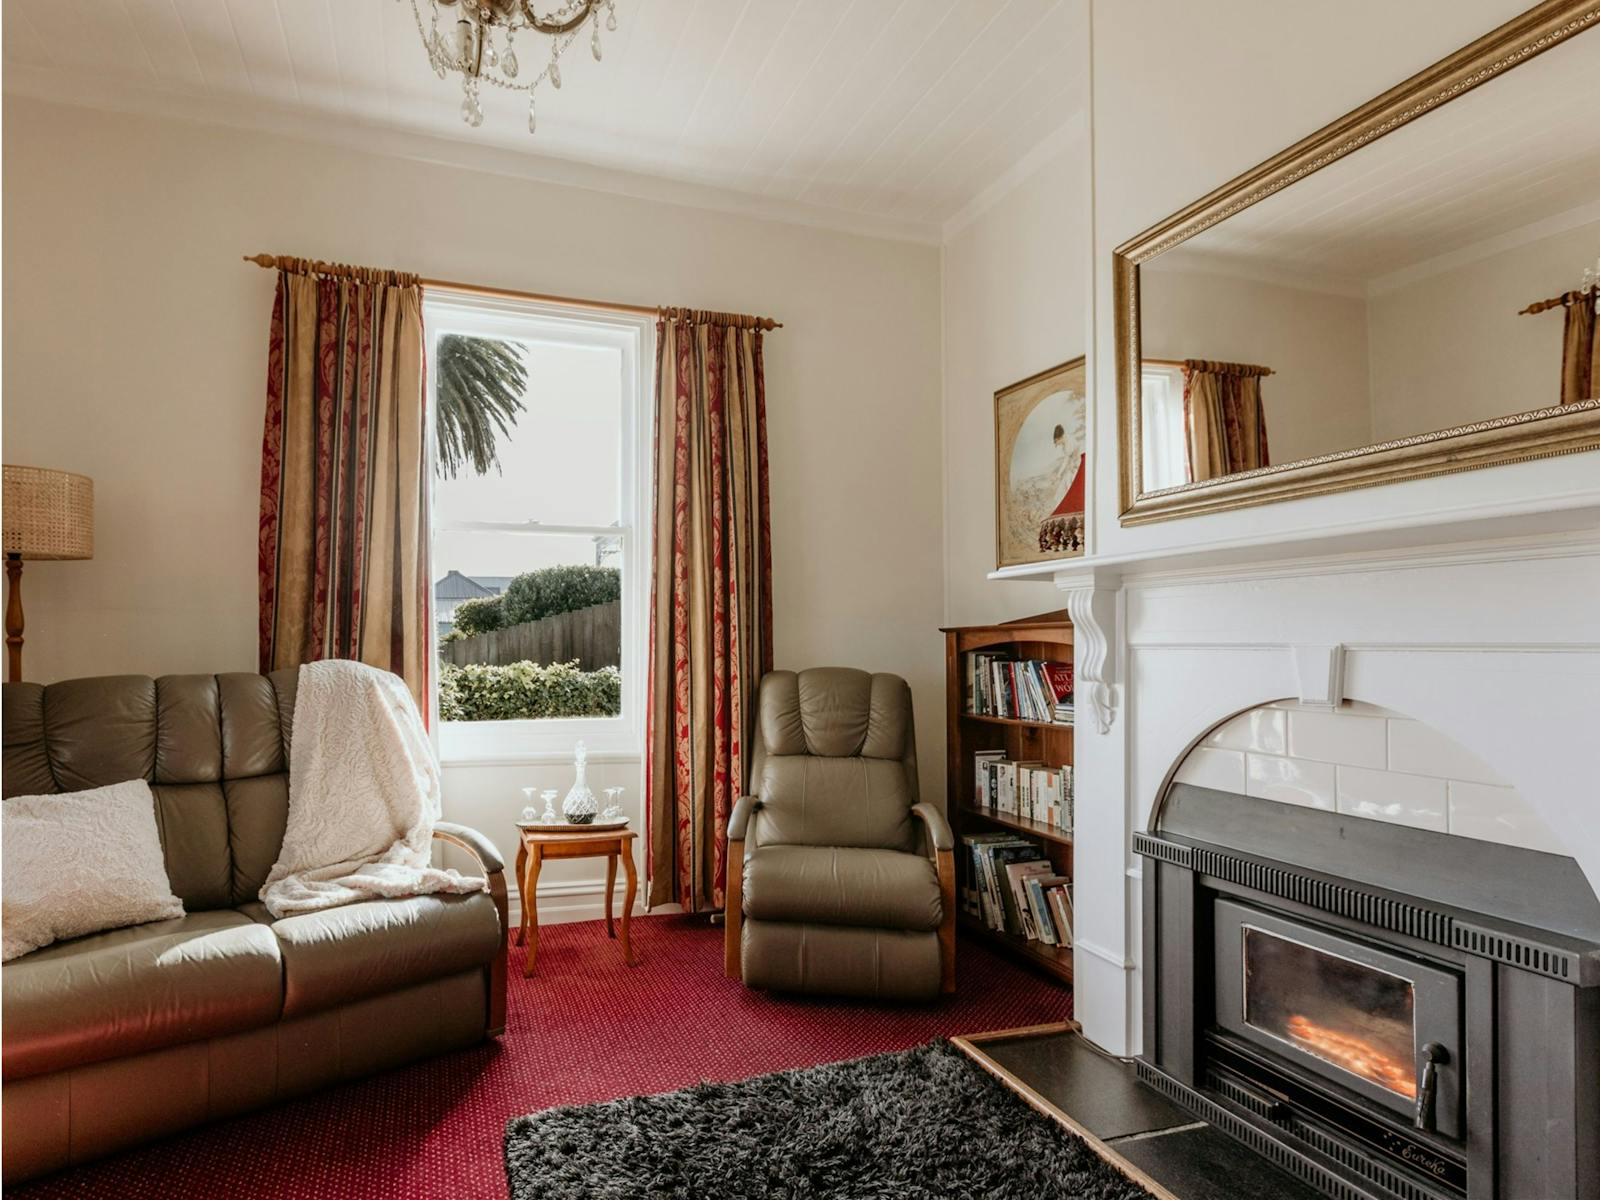 comfortable seating, smart tv, wood fire set ready, books to read, soft lighting, fantastic views